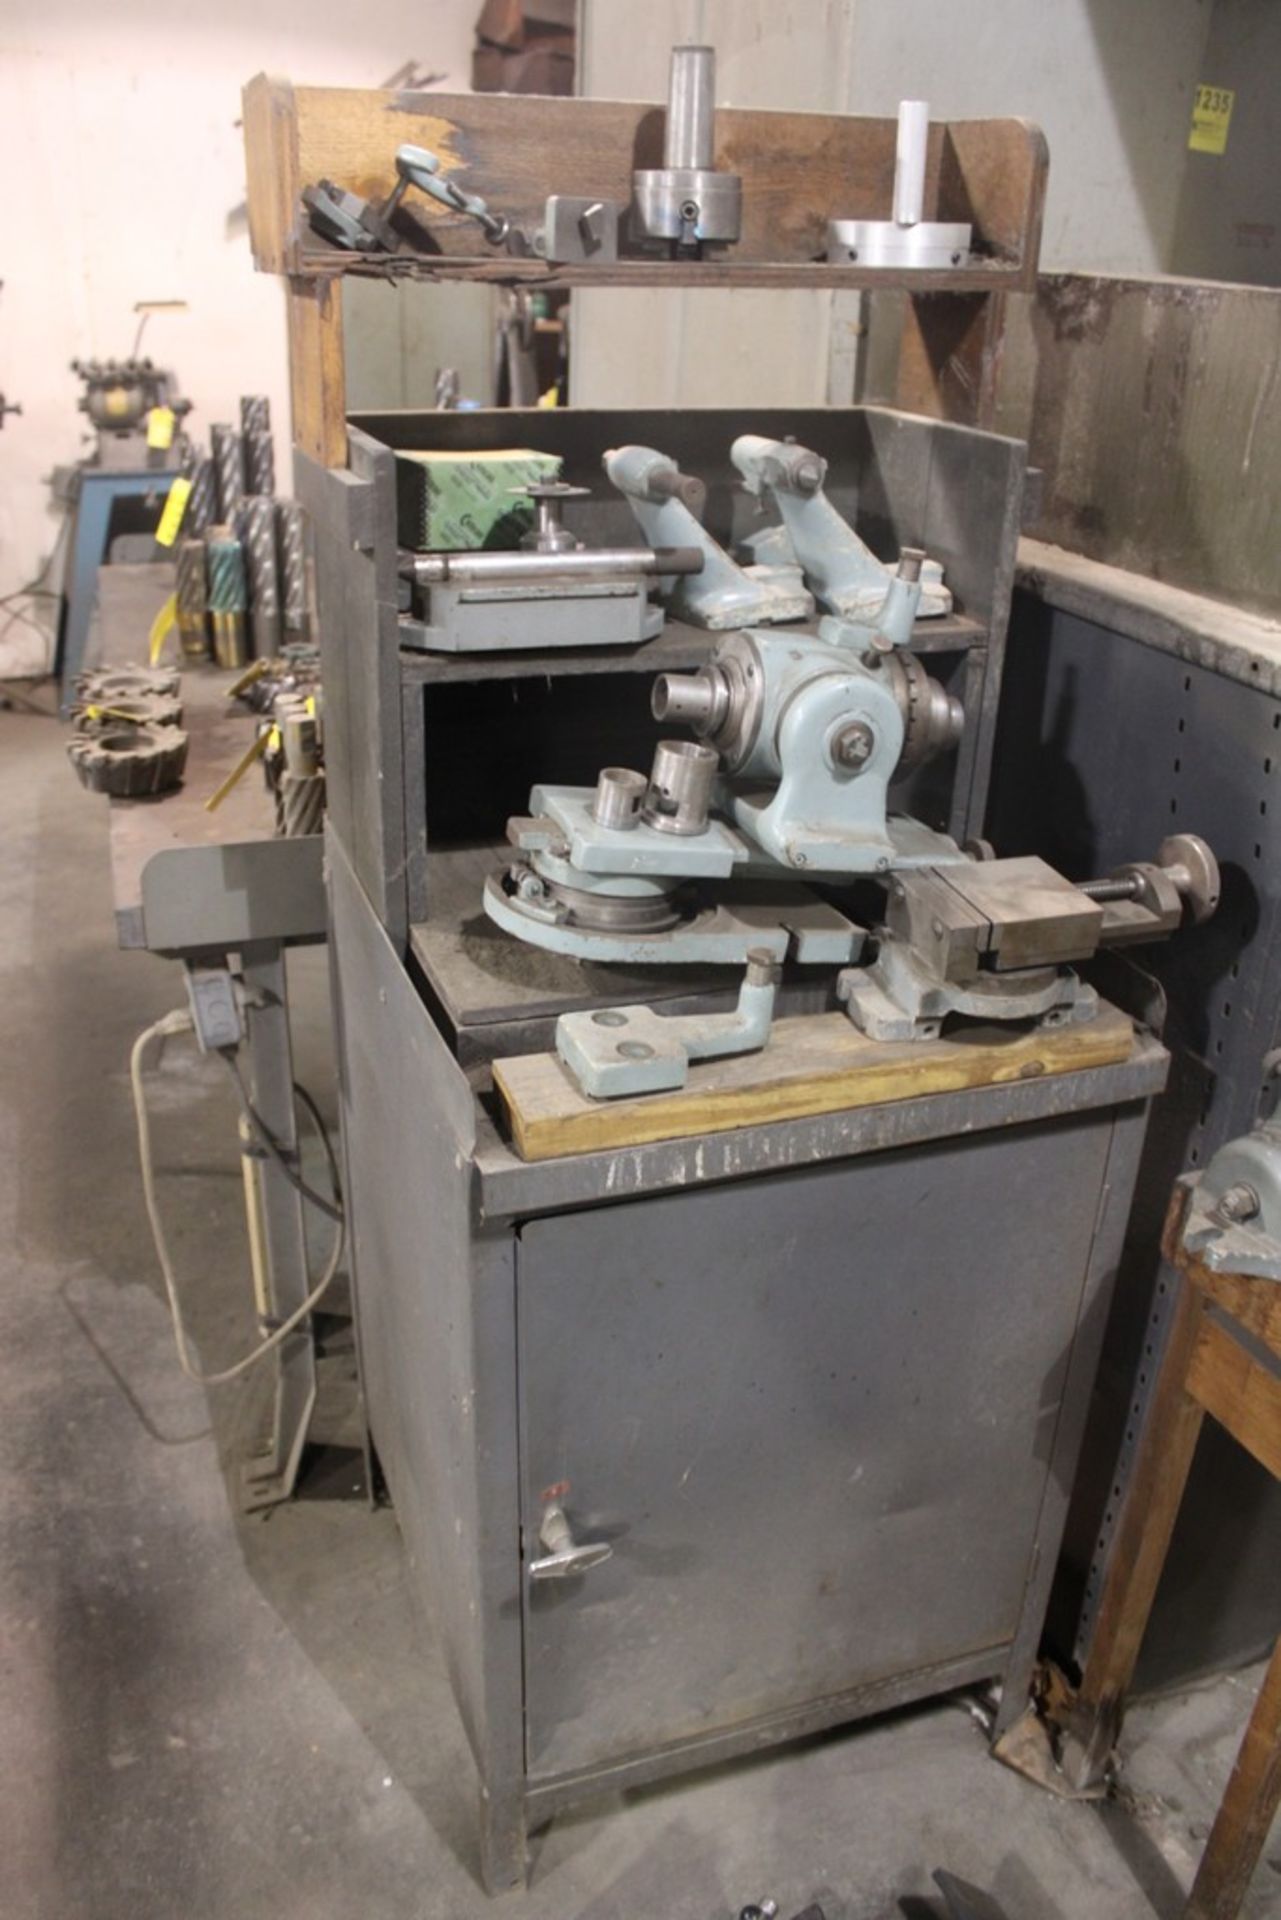 CINCINNATI NO. 2 TOOL & CUTTER GRINDER, S/N 1D2T6R-233, WITH WORK HEAD, LARGE QTY OF ACCESSORIES - Image 4 of 7